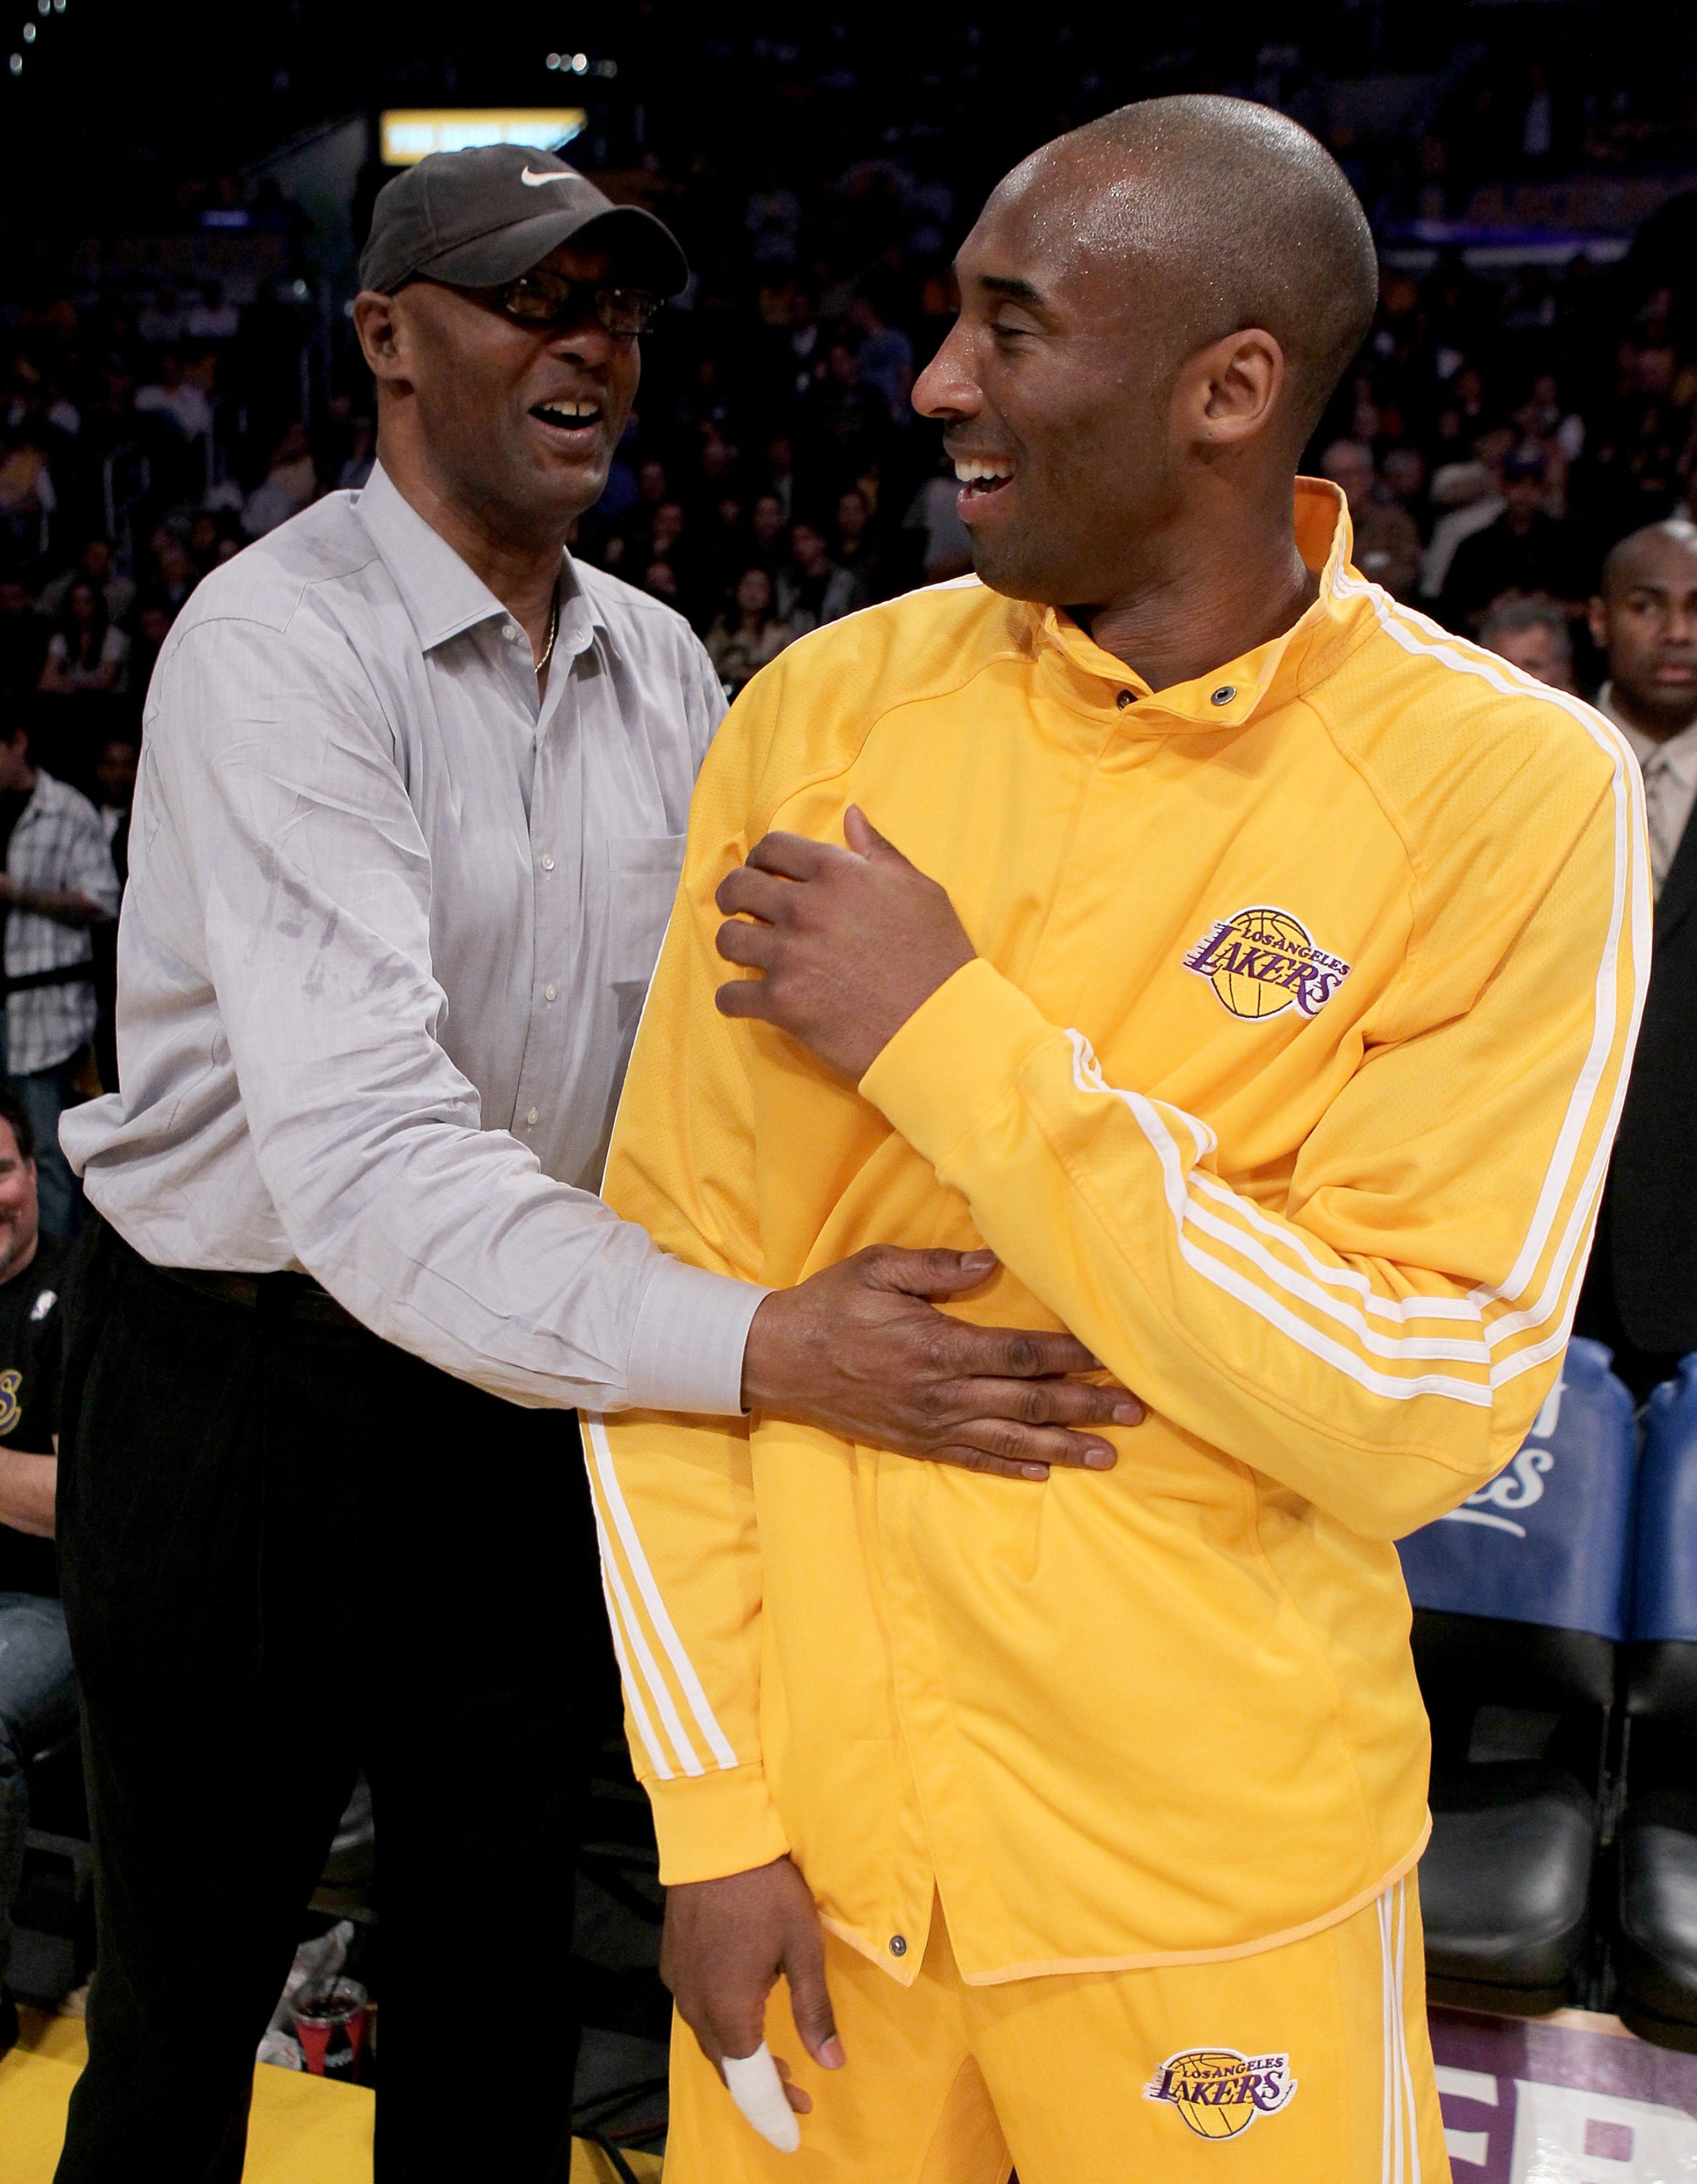 LOS ANGELES - APRIL 20: Kobe Bryant #24 of the Los Angeles Lakers laughs with father Joe Jelly Bean Bryant before playing the Oklahoma City Thunder during Game Two of the Western Conference Quarterfinals of the 2010 NBA Playoffs on April 20, 2010 at Staples Center in Los Angeles, California. NOTE TO USER: User expressly acknowledges and agrees that, by downloading and/or using this Photograph, user is consenting to the terms and conditions of the Getty Images License Agreement. (Photo by Stephen Dunn/Getty Images)